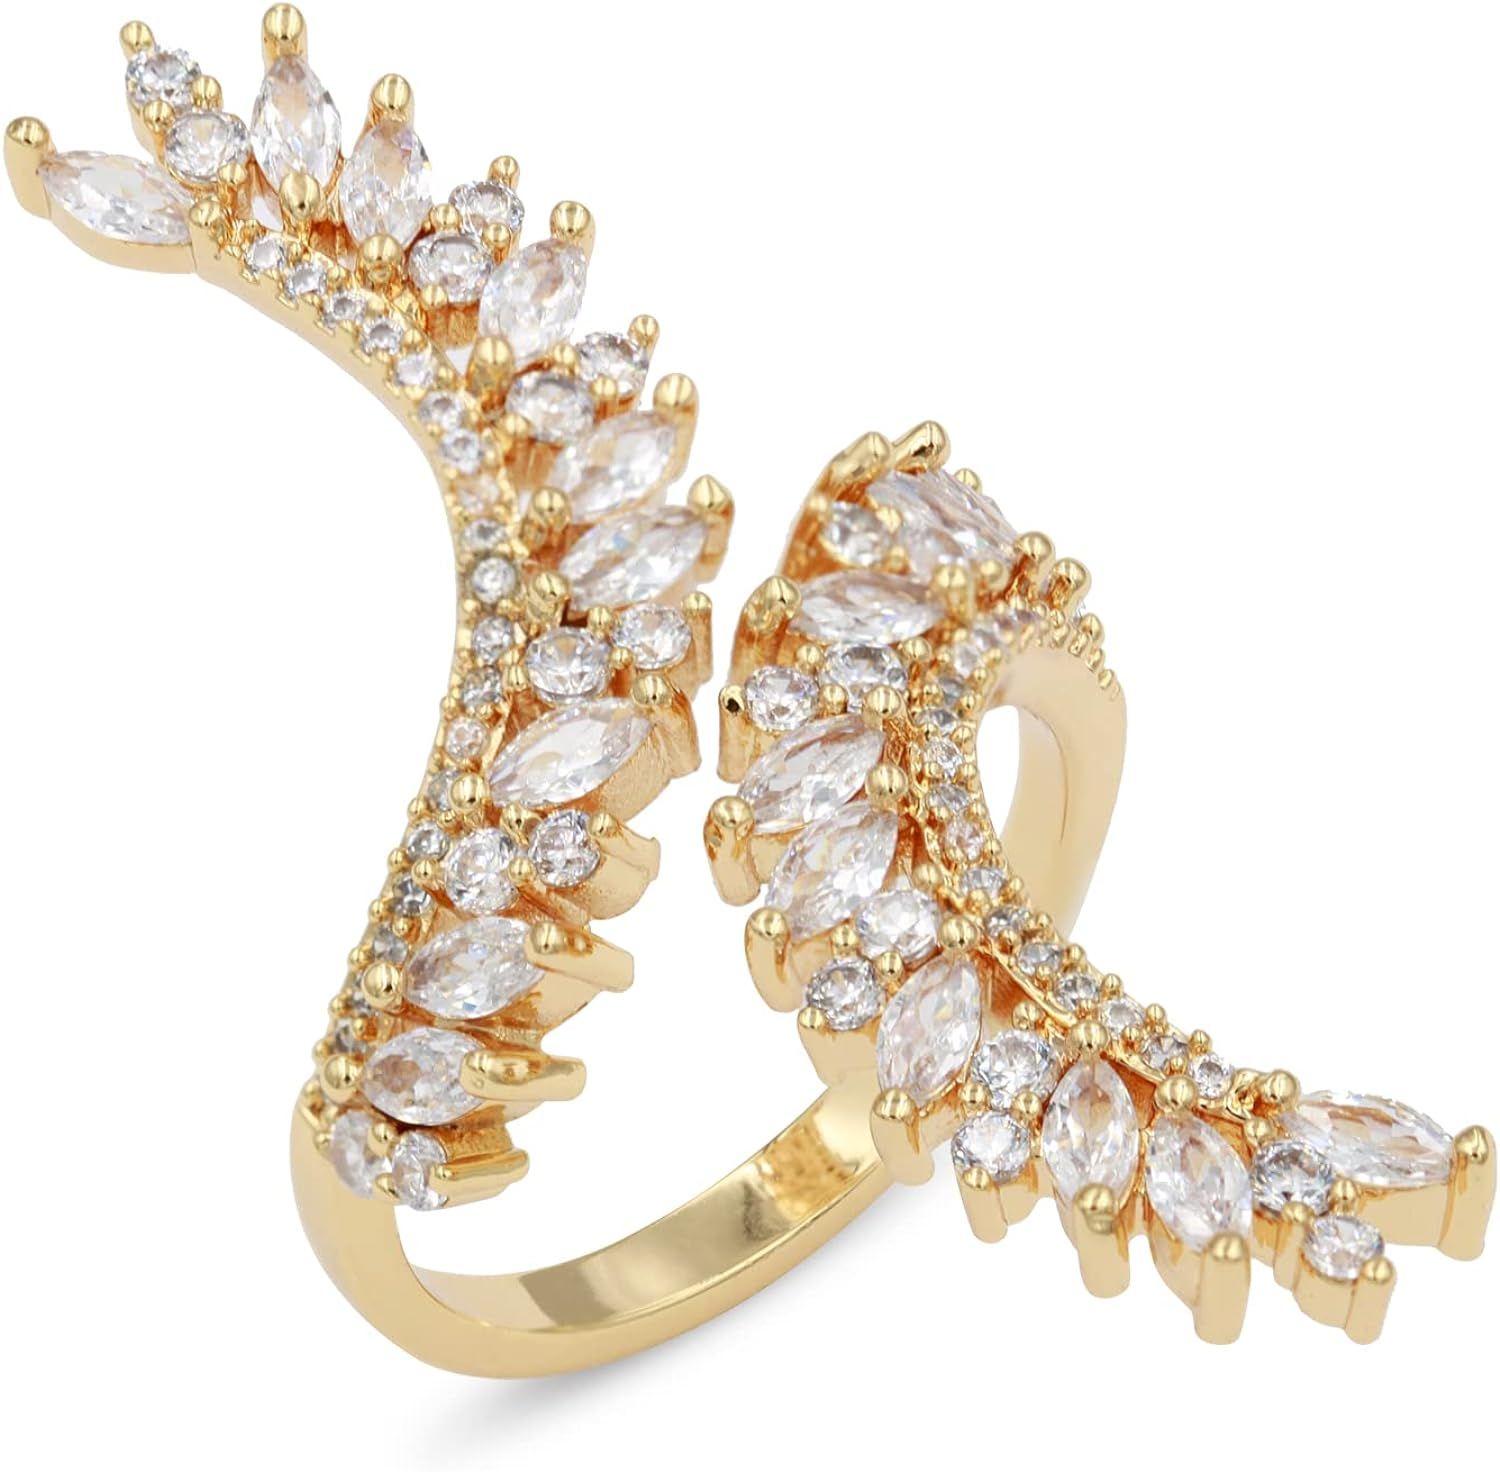 Cocktail Fashion Ring Size Adjustable From 6-8.5 CZ Marquise Shape Jewelry for Women | Amazon (US)